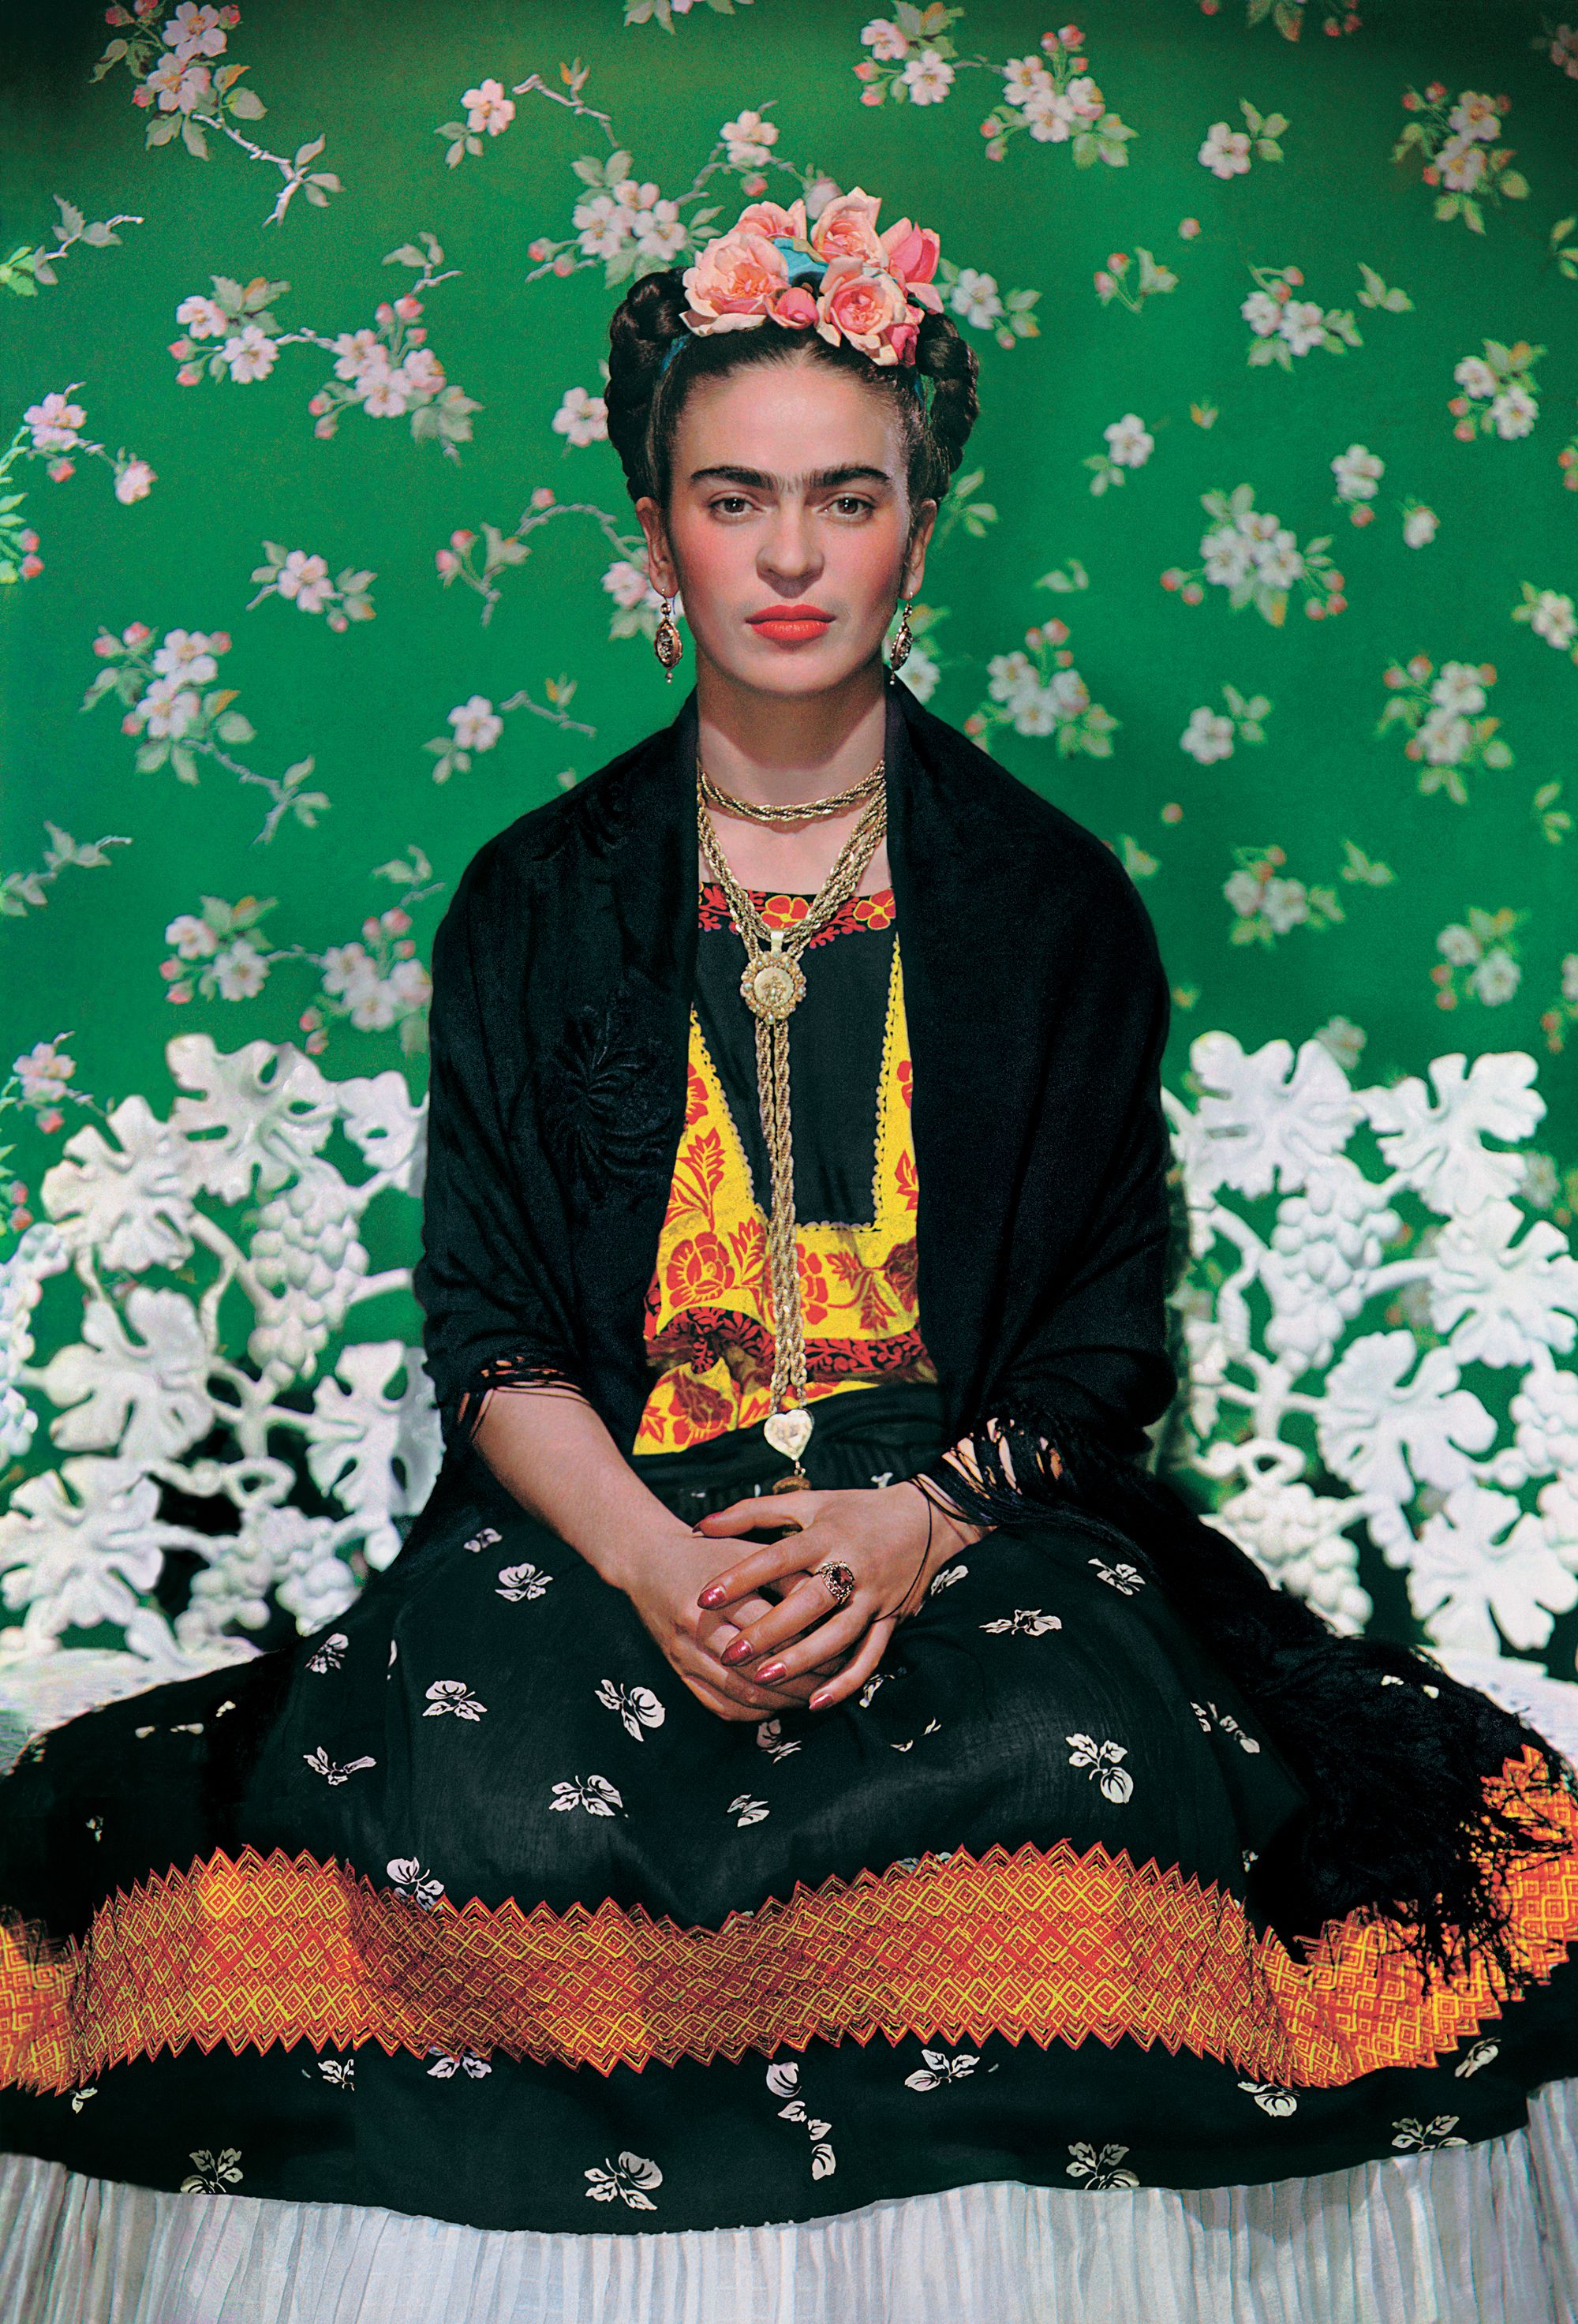 Frida Kahlo: the Mexican artist who used fashion to make a powerful political statement